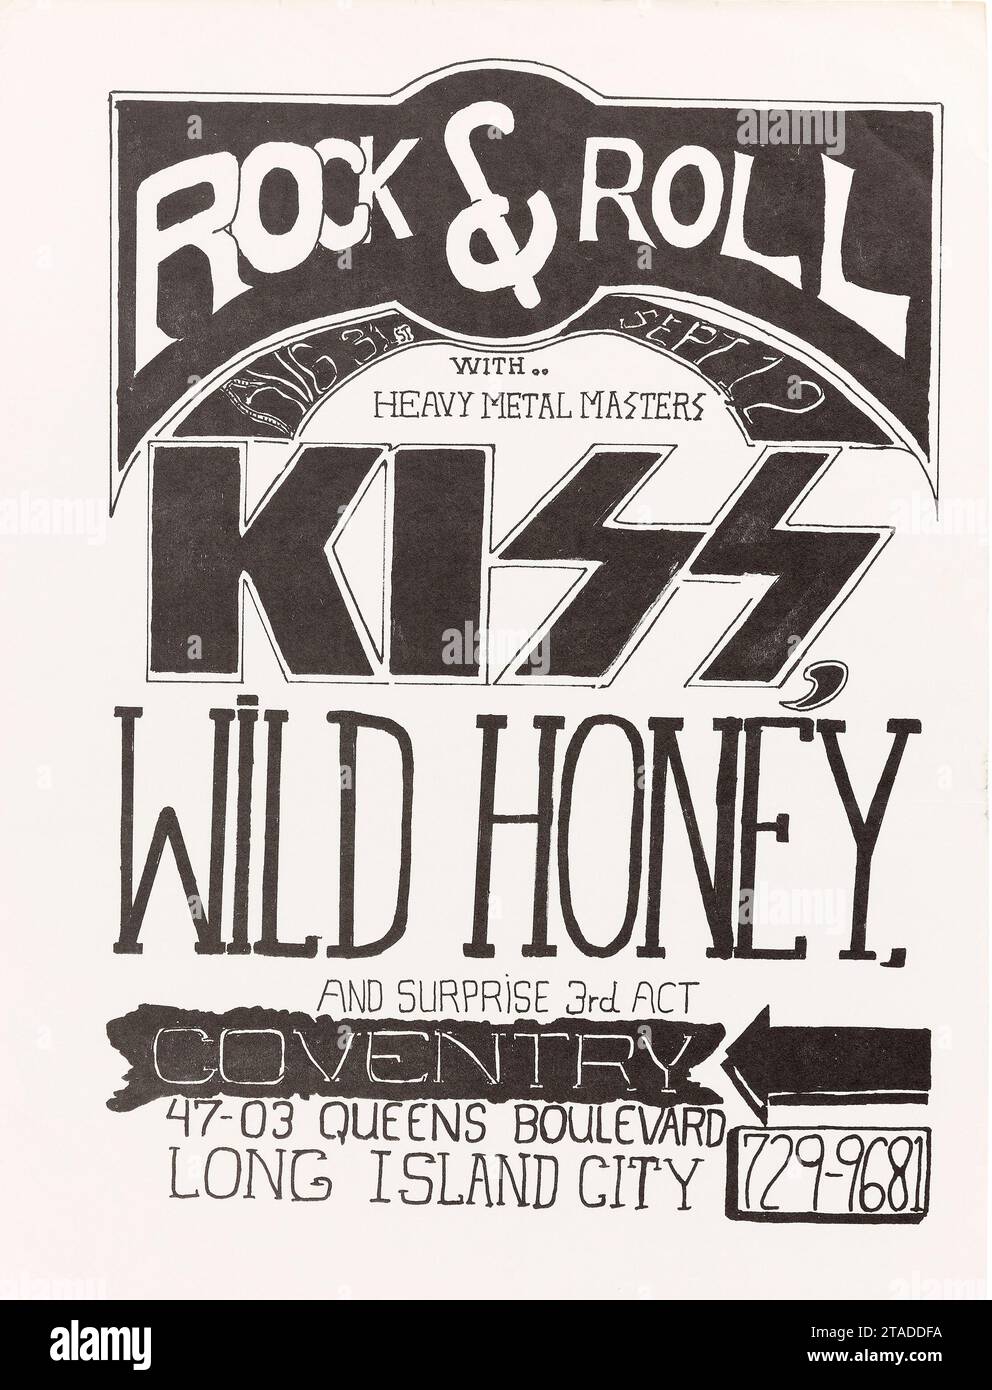 Heavy Metal Masters KISS - Very Early, Pre-First-Album - Vintage Rock Concert Poster - Coventry, Queens Boulevard. Stock Photo